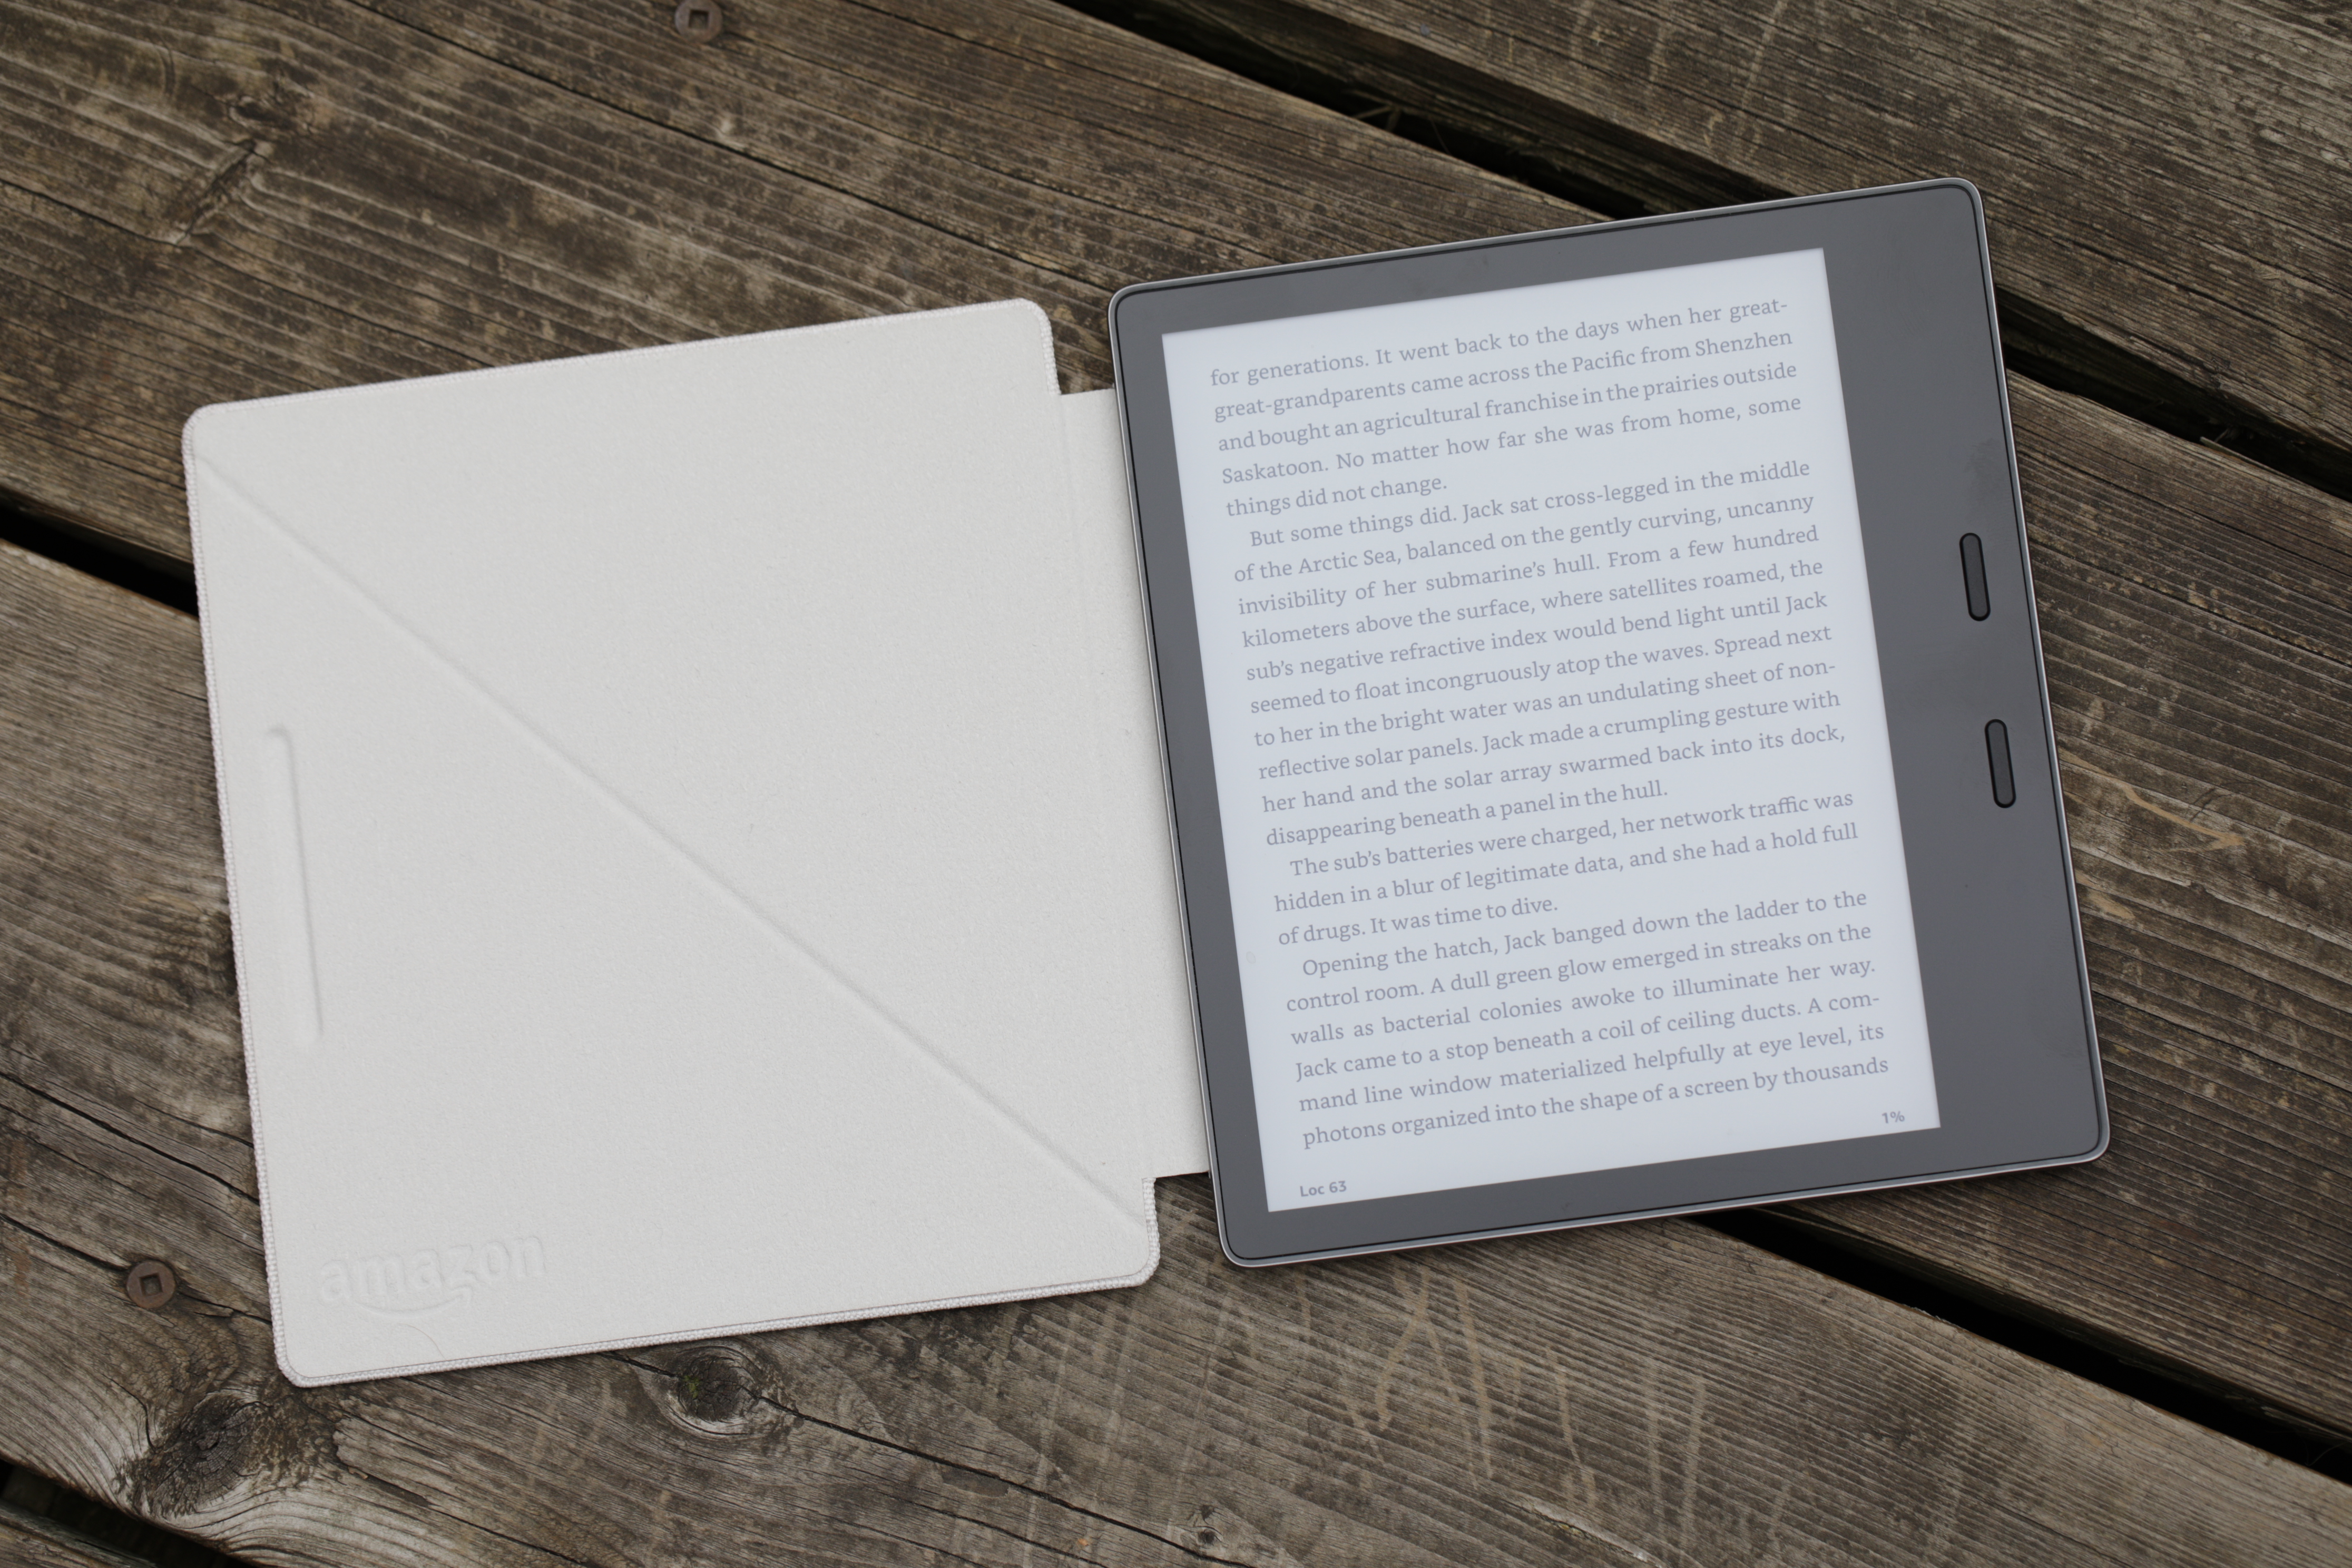 How the Kindle was designed through 10 years and 15 generations